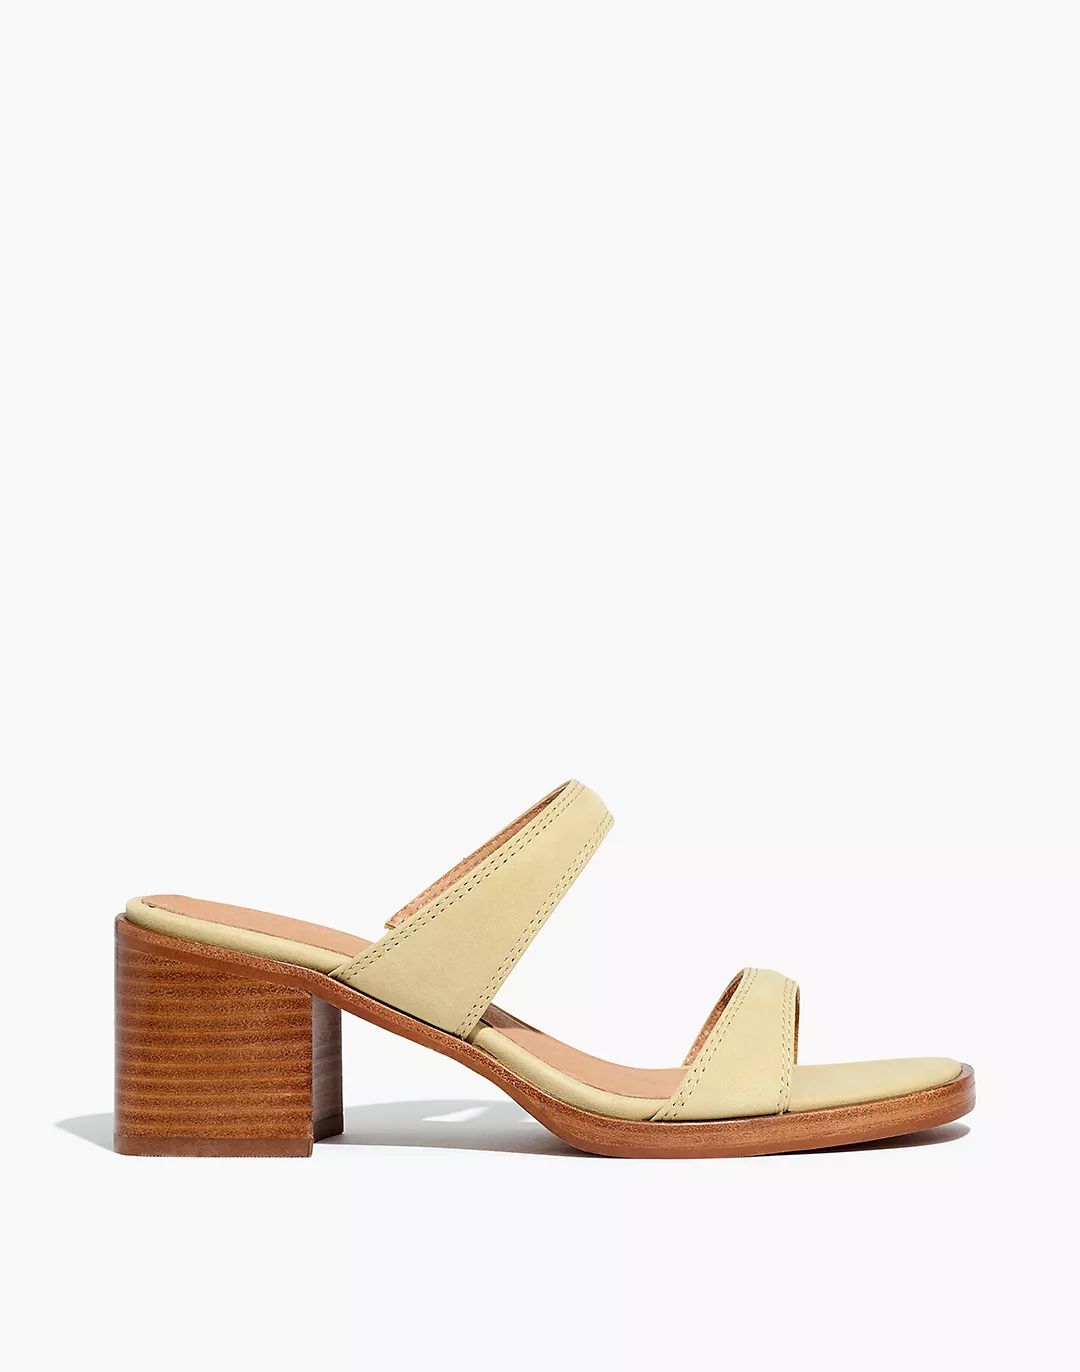 The Saige Double-Strap Sandal in Nubuck Leather | Madewell